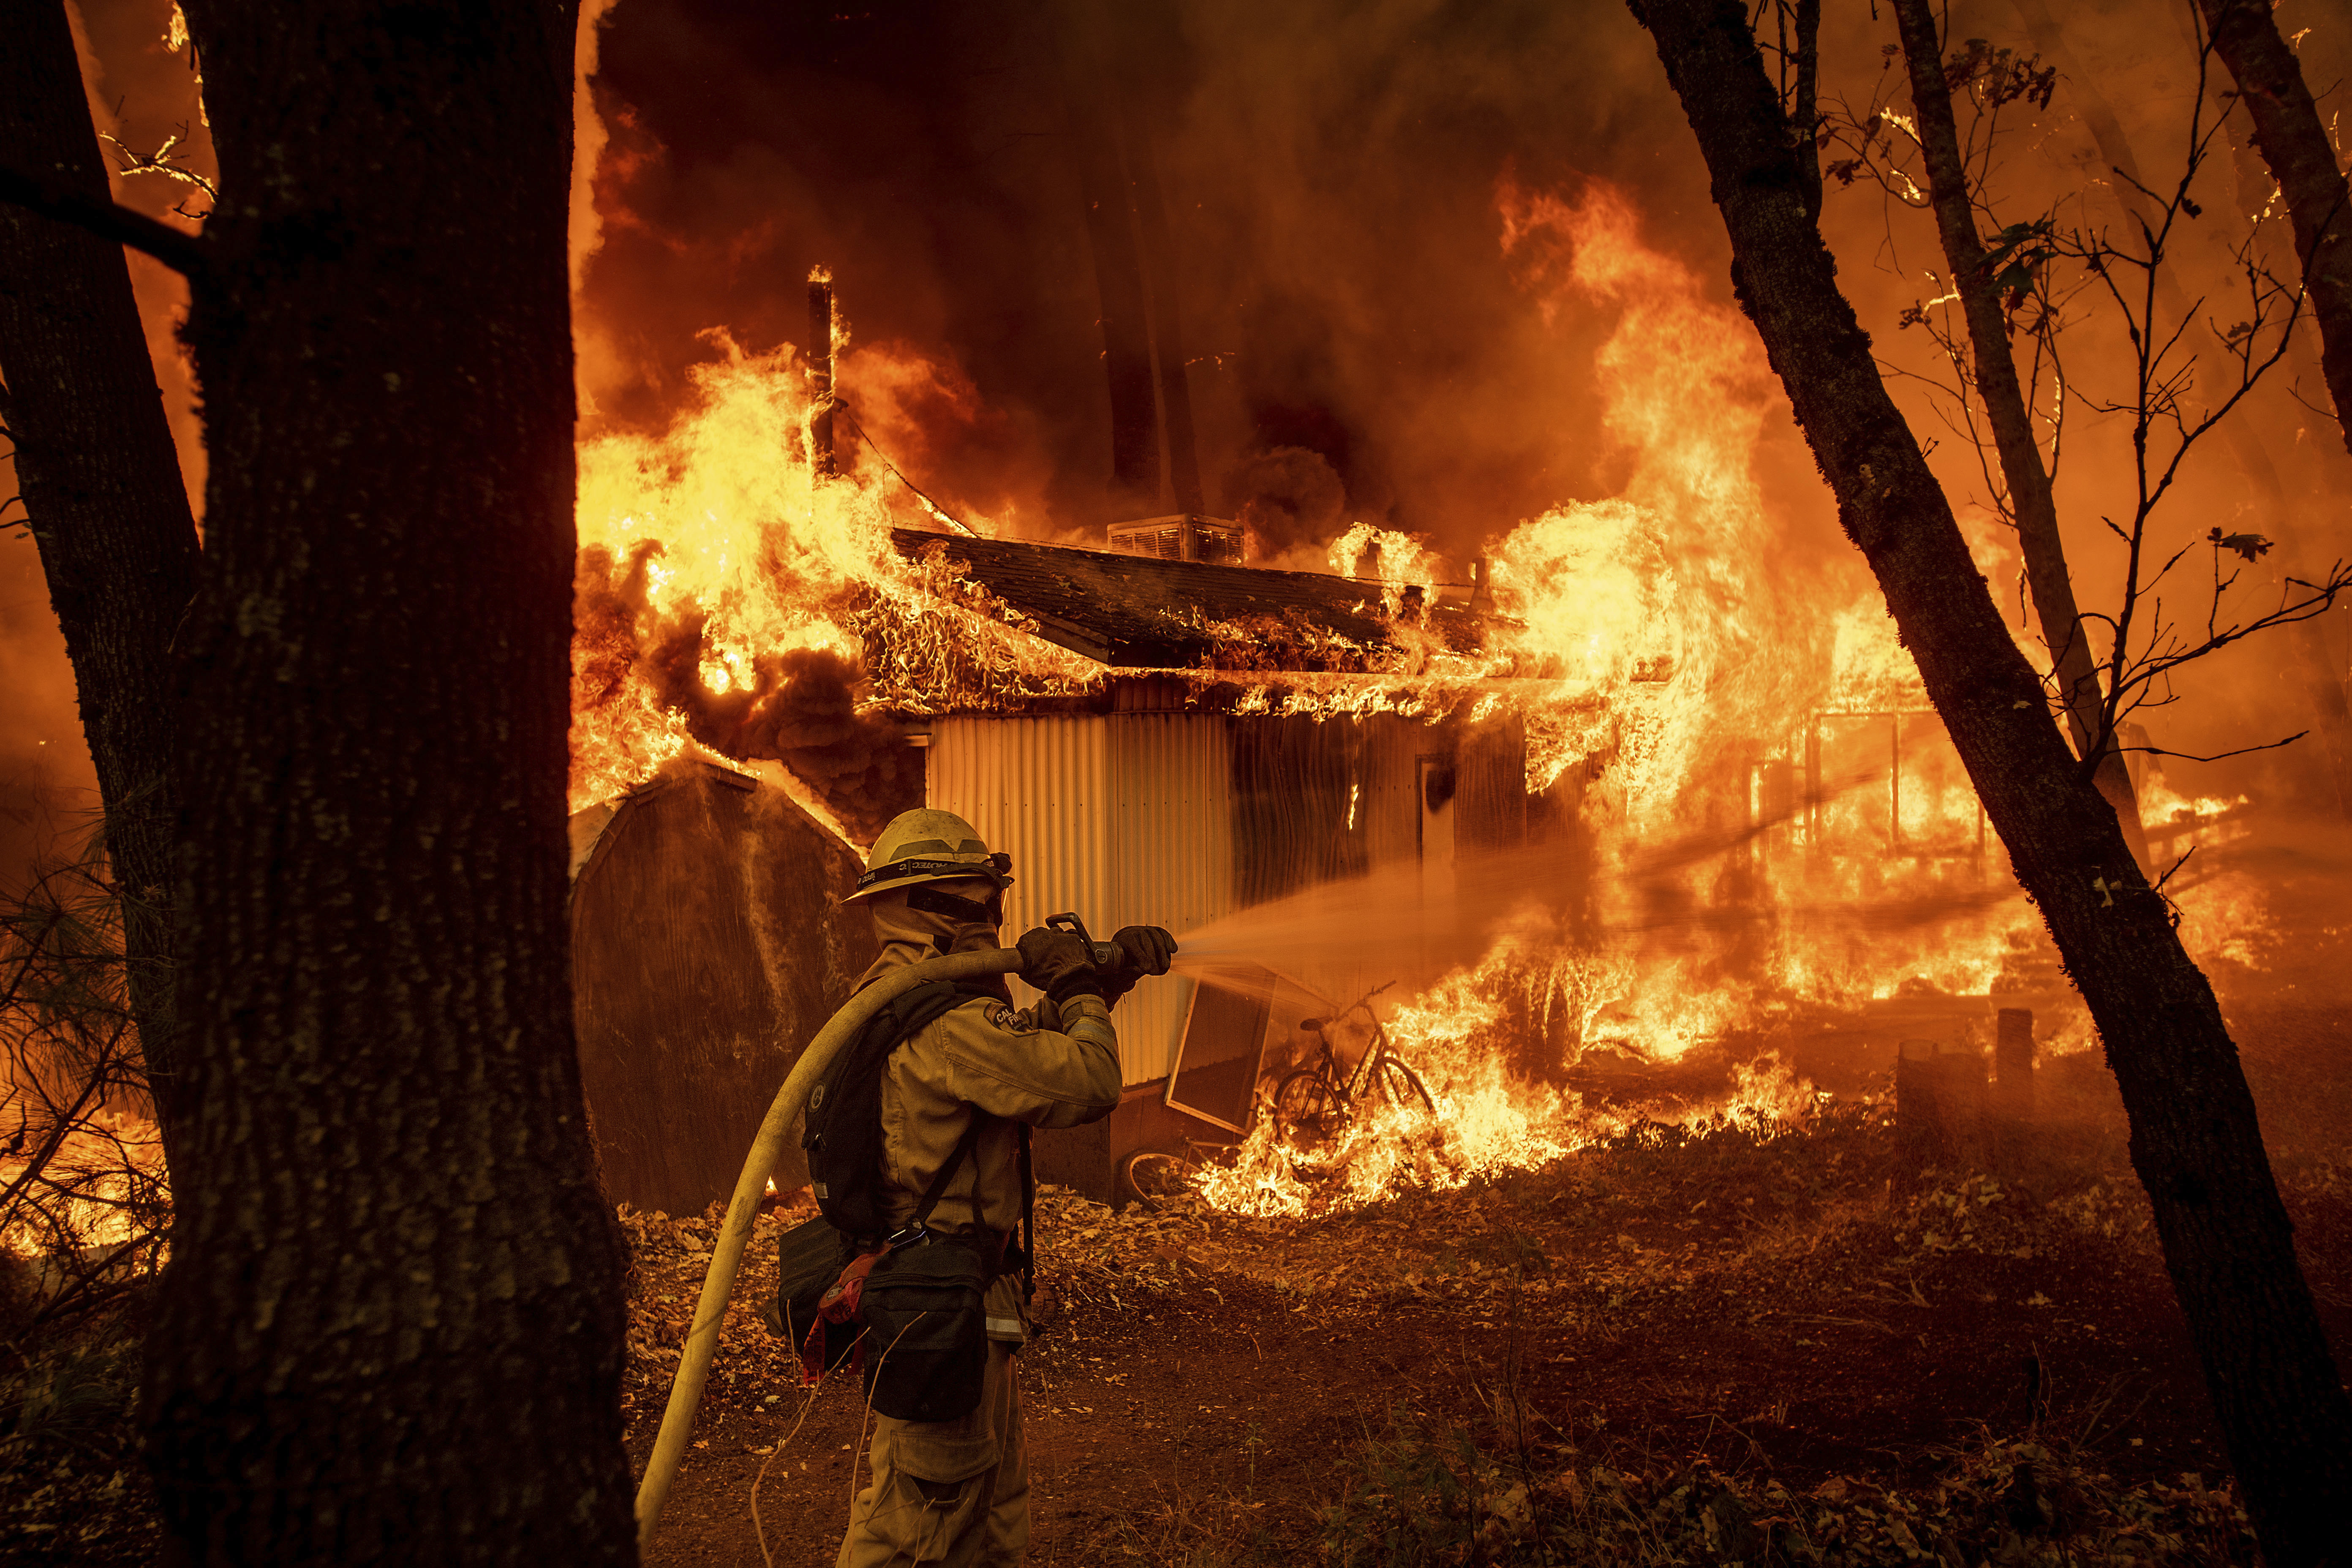 Firefighter Jose Corona sprays water as flames from the Camp Fire consume a home in Magalia, Calif., on Friday, Nov. 9, 2018. (AP Photo/Noah Berger)